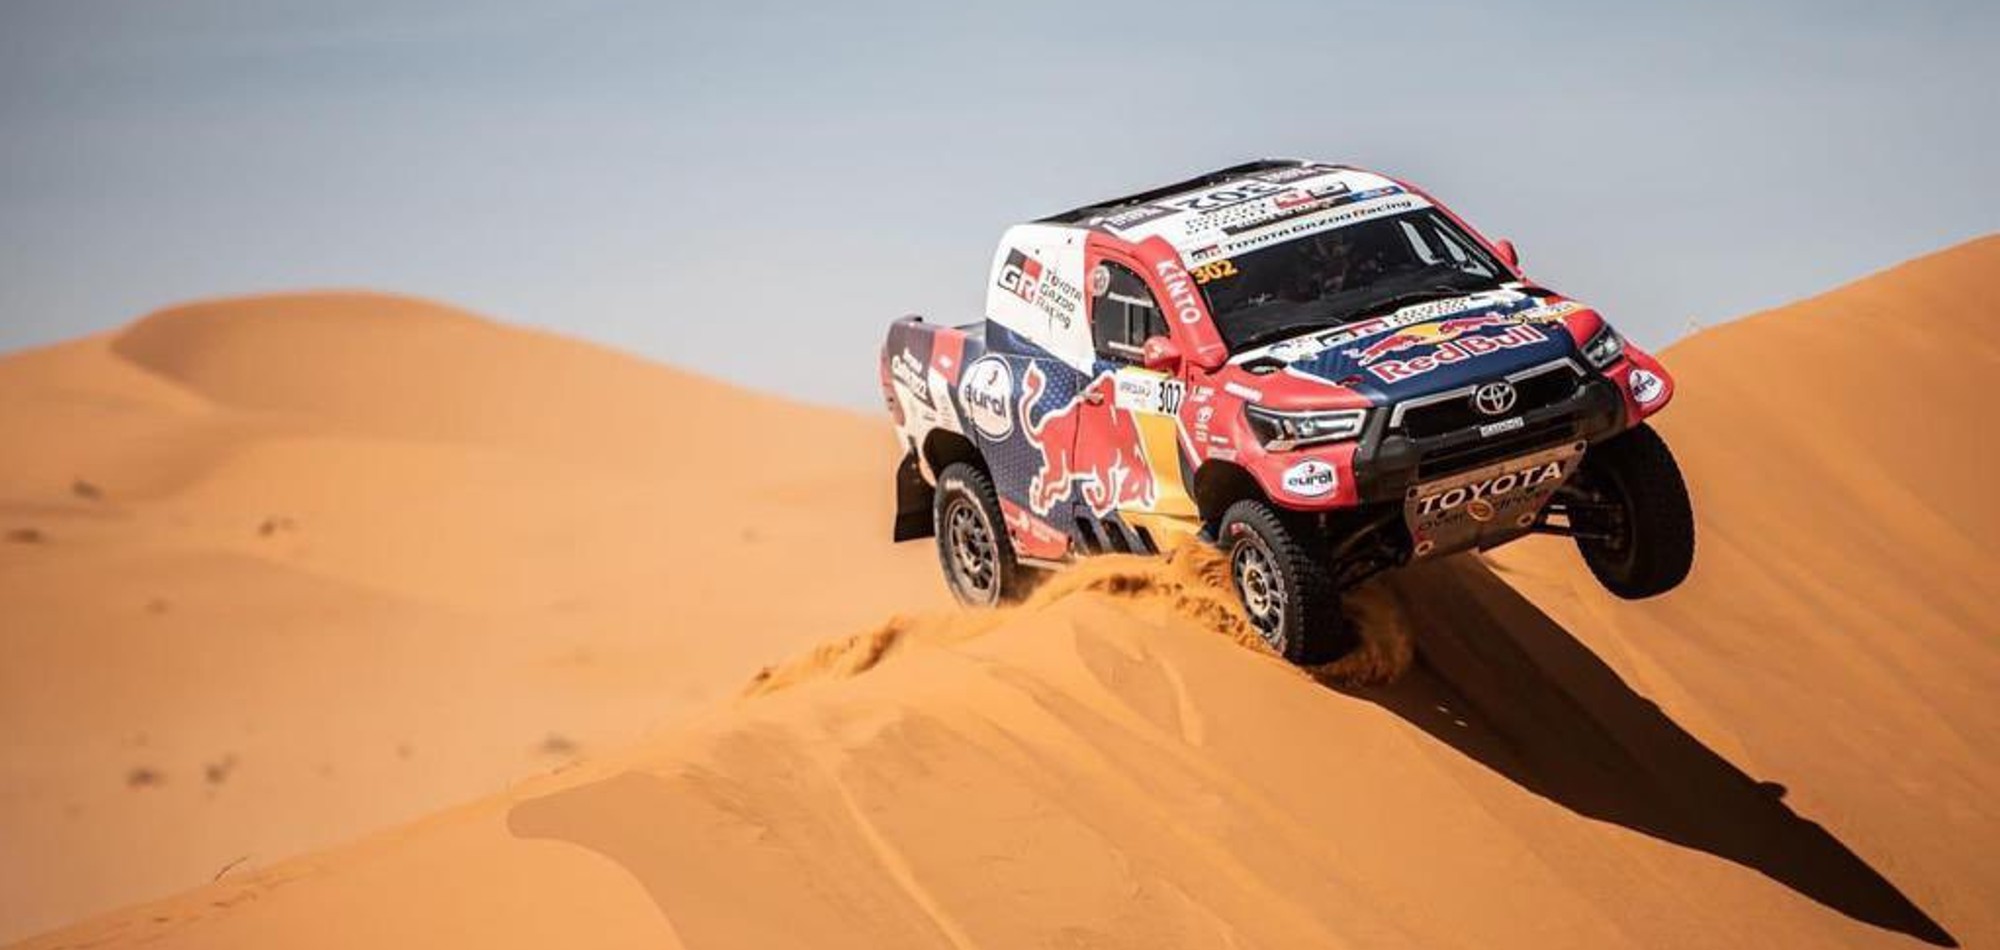 Al Attiyah retains overall lead in Morocco